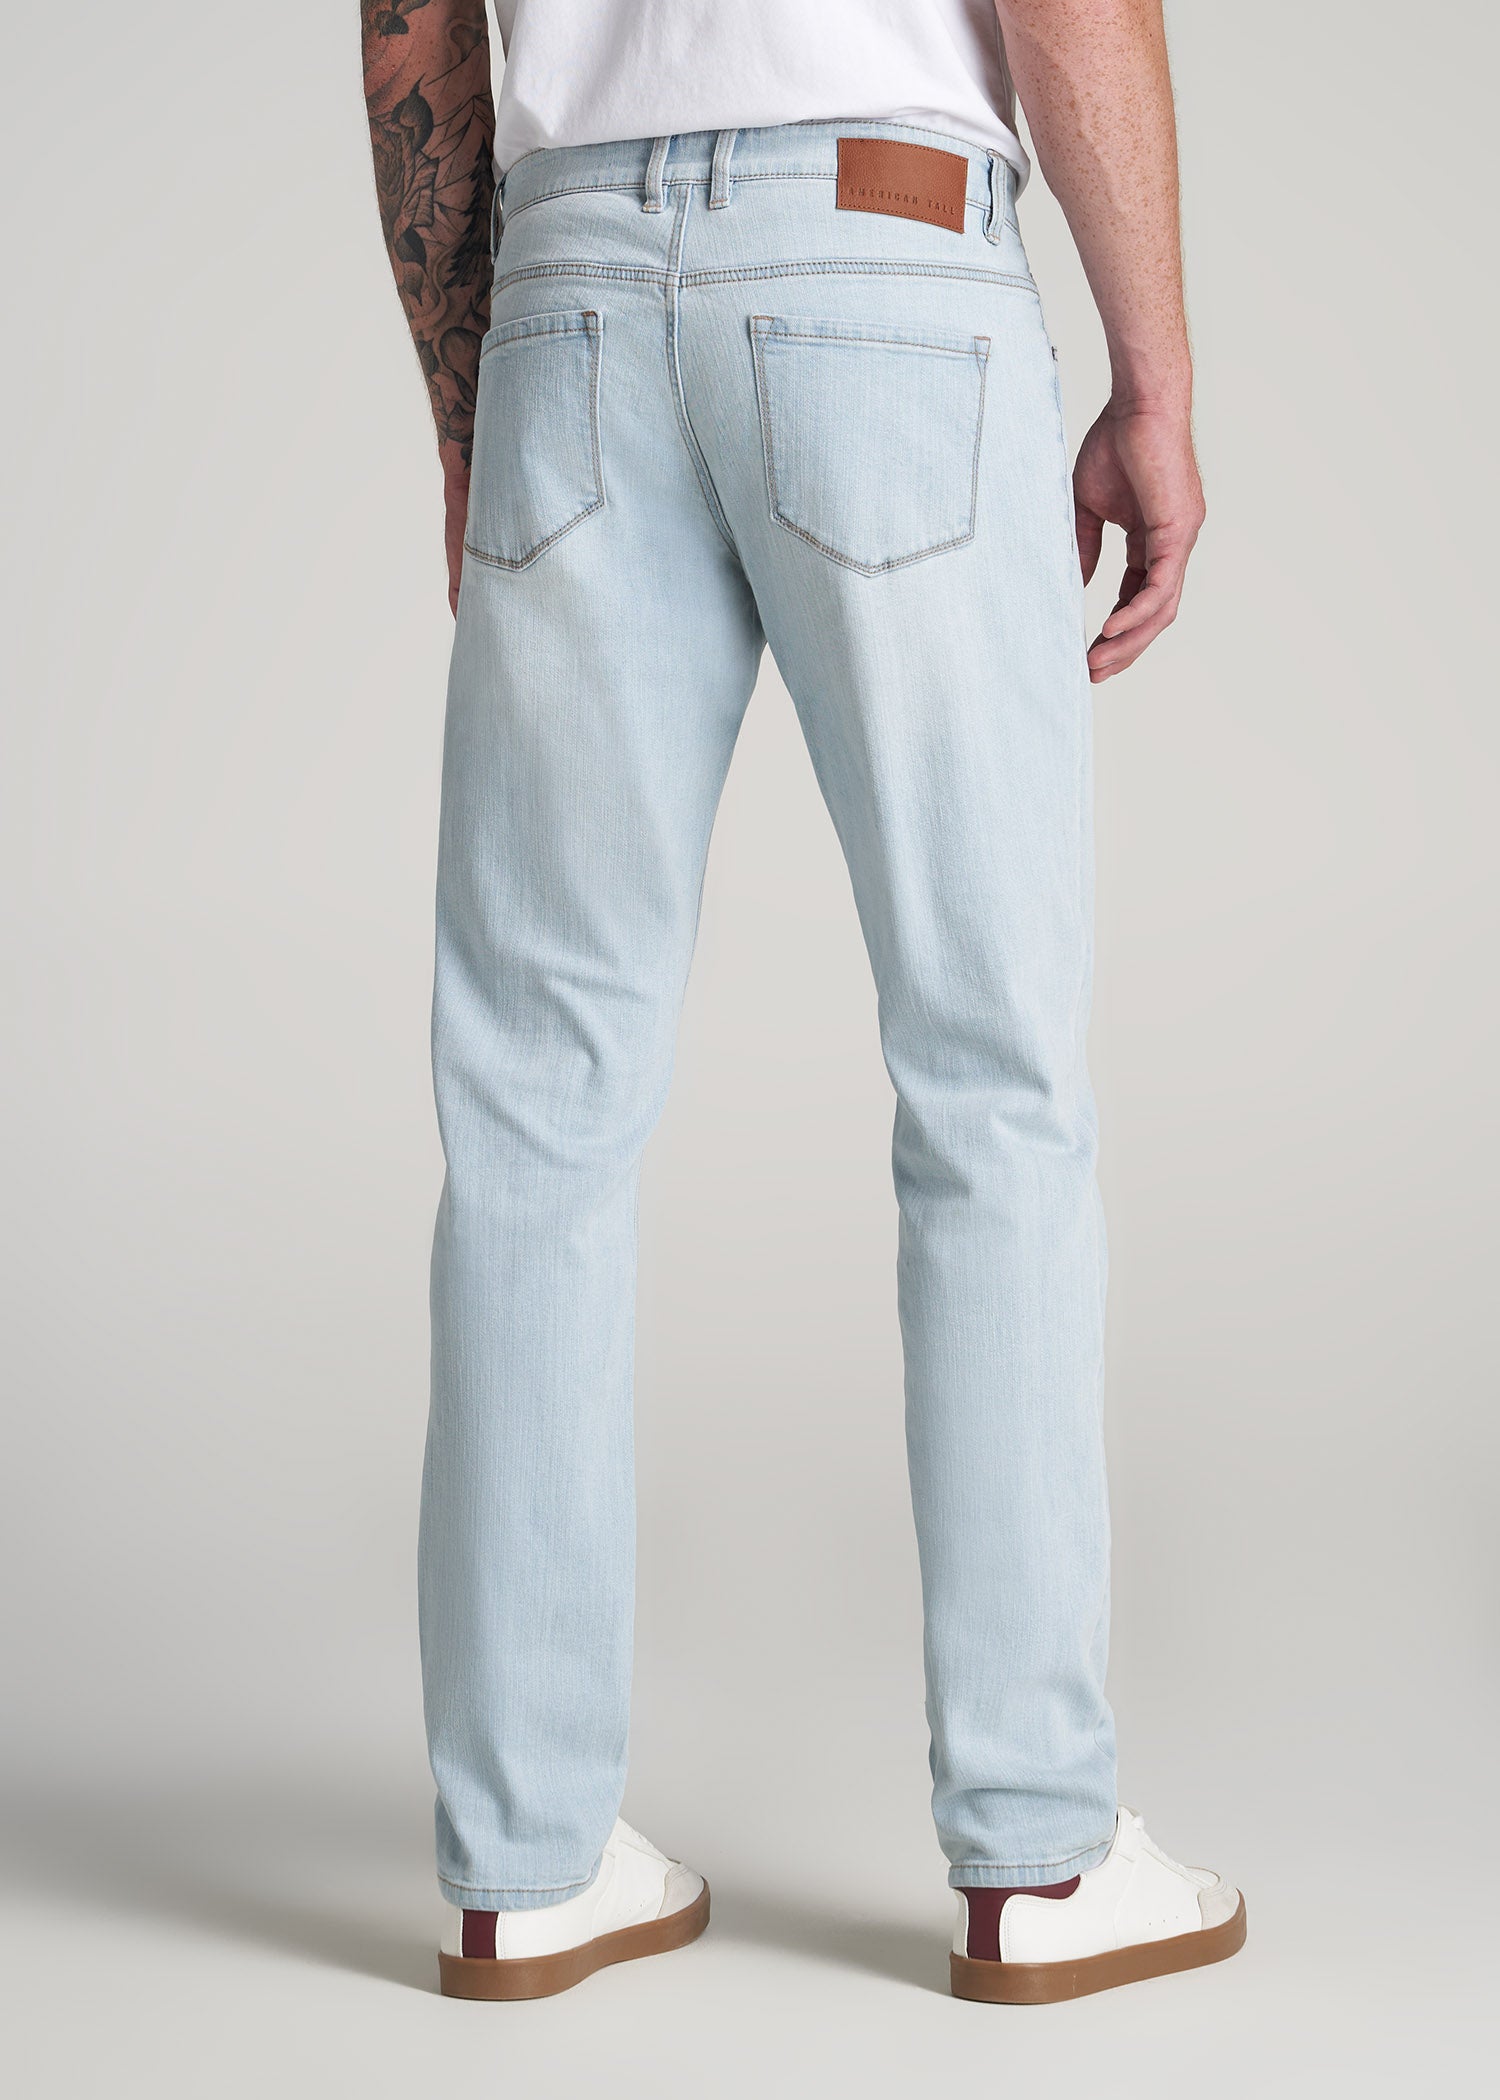 Abercrombie & Fitch athletic straight fit jeans in light wash